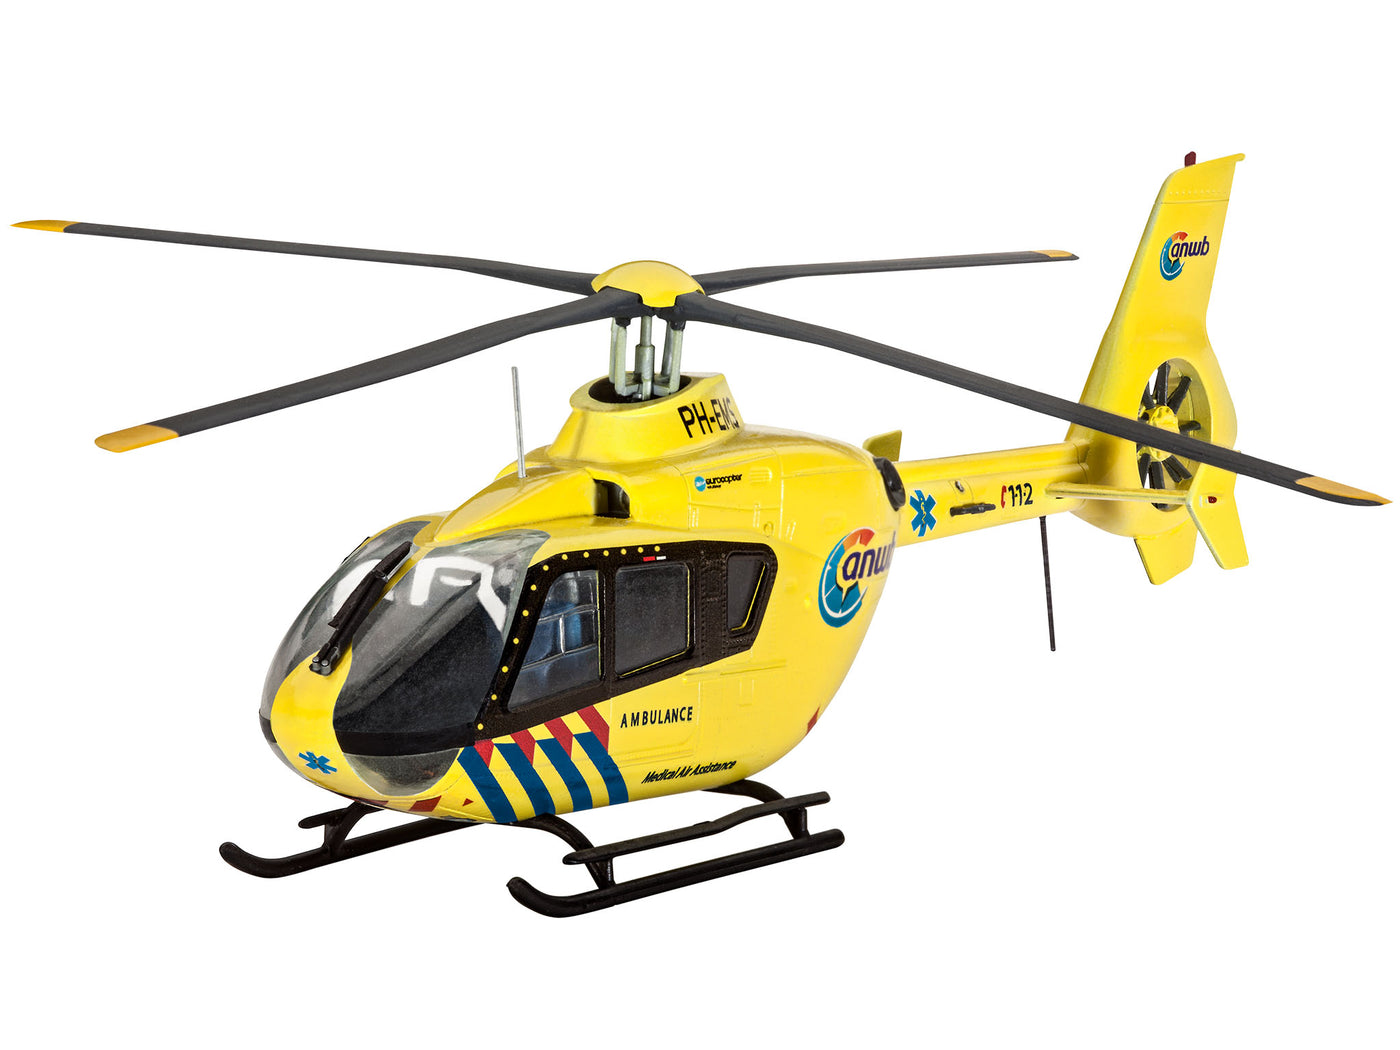 1/72 Airbus Helicopters EC135 ANWB  Model Set